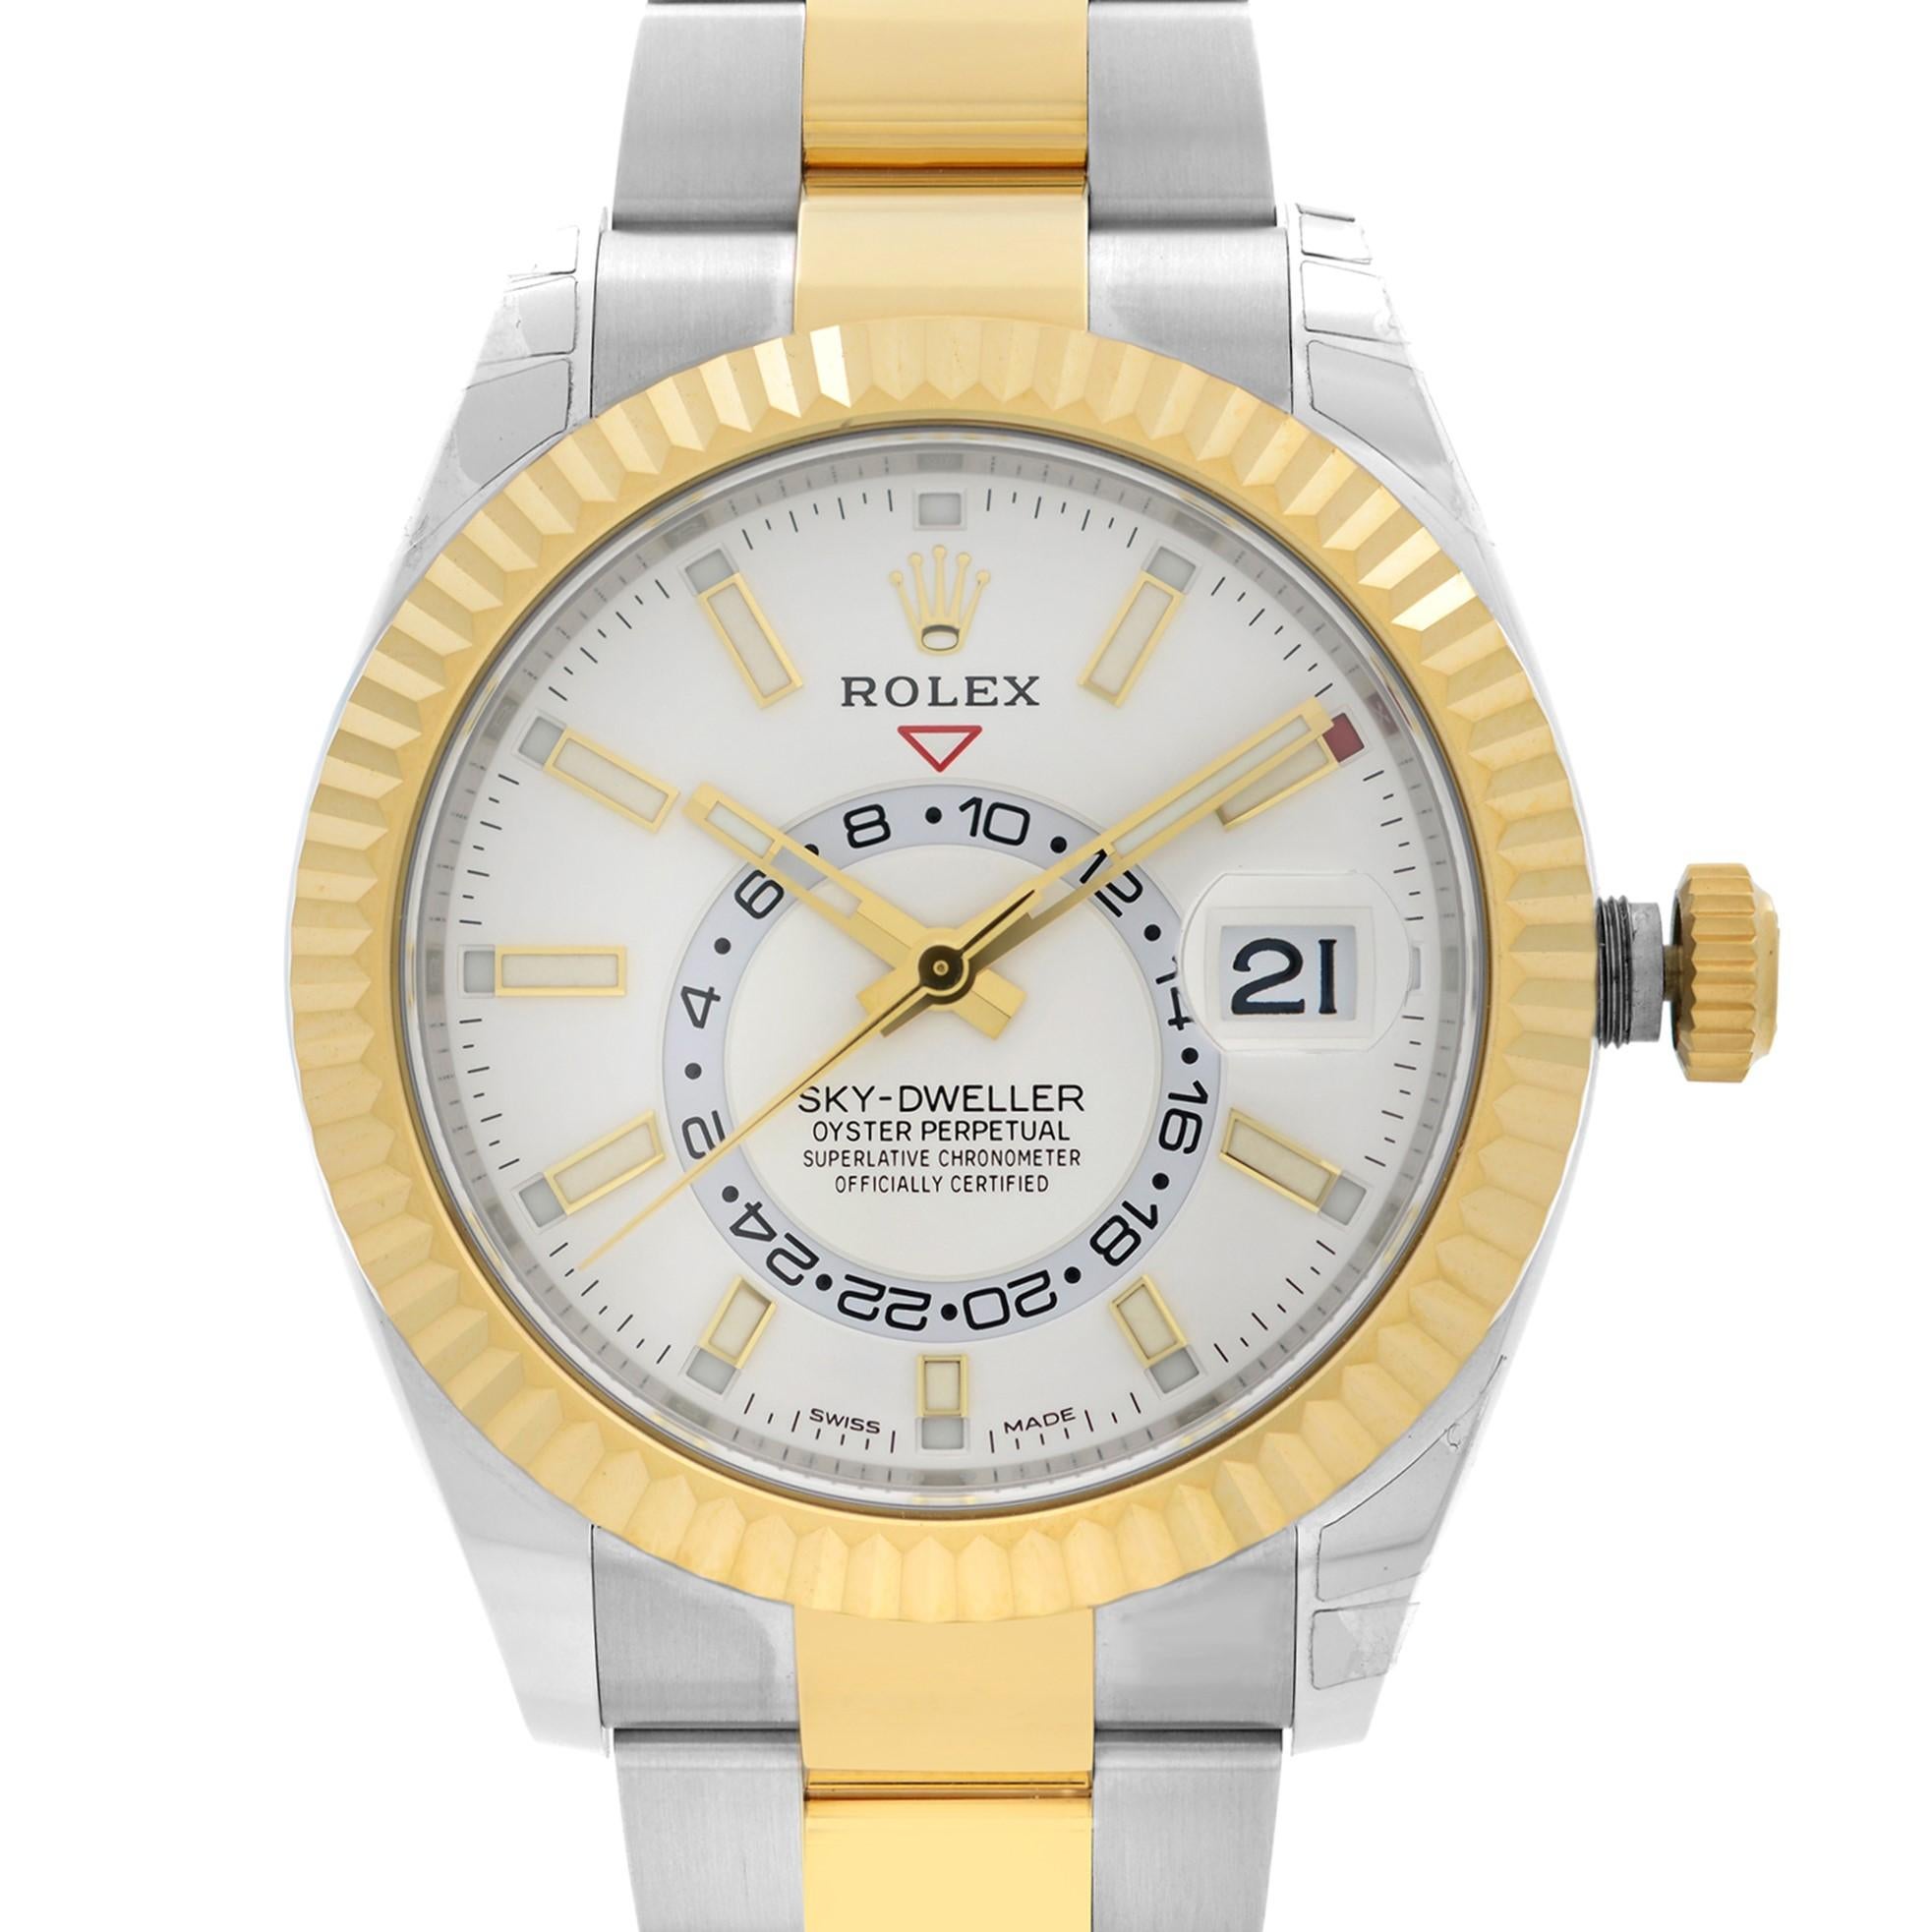 Rolex Oyster Perpetual Sky-Dweller 18K Yellow Gold Steel Men's Watch 326933WSO. This Beautiful Timepiece Features: Stainless Steel Case with Stainless Steel and 18k Yellow Gold Rolex Oyster Bracelet; Fluted Ring Command 18k Yellow Gold Bezel; White